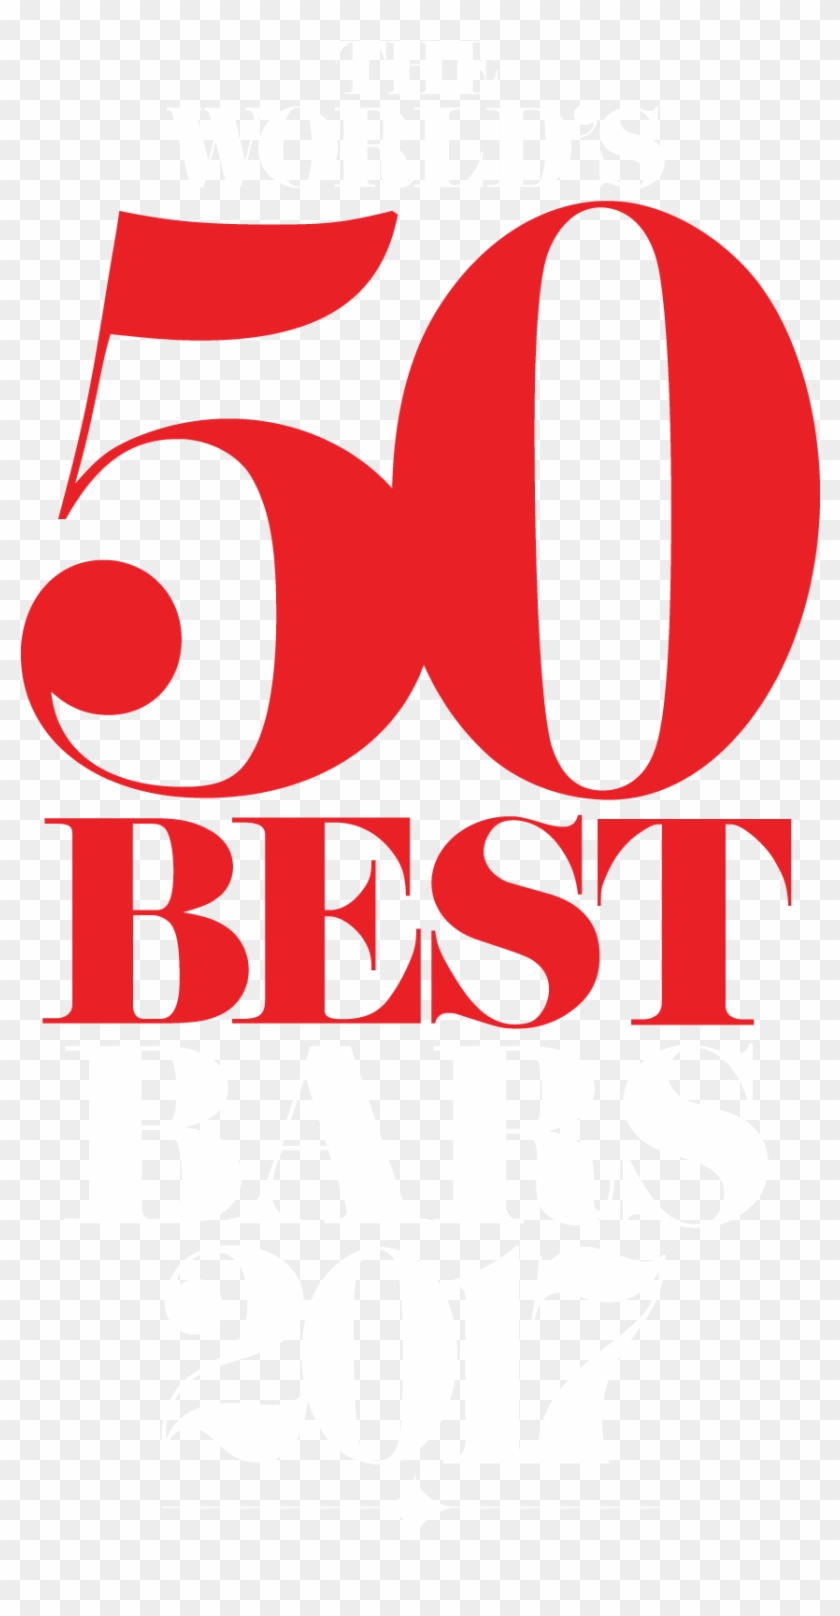 Asias 50 Best Bars World's 50 Best Bars Logo, HD Png Download